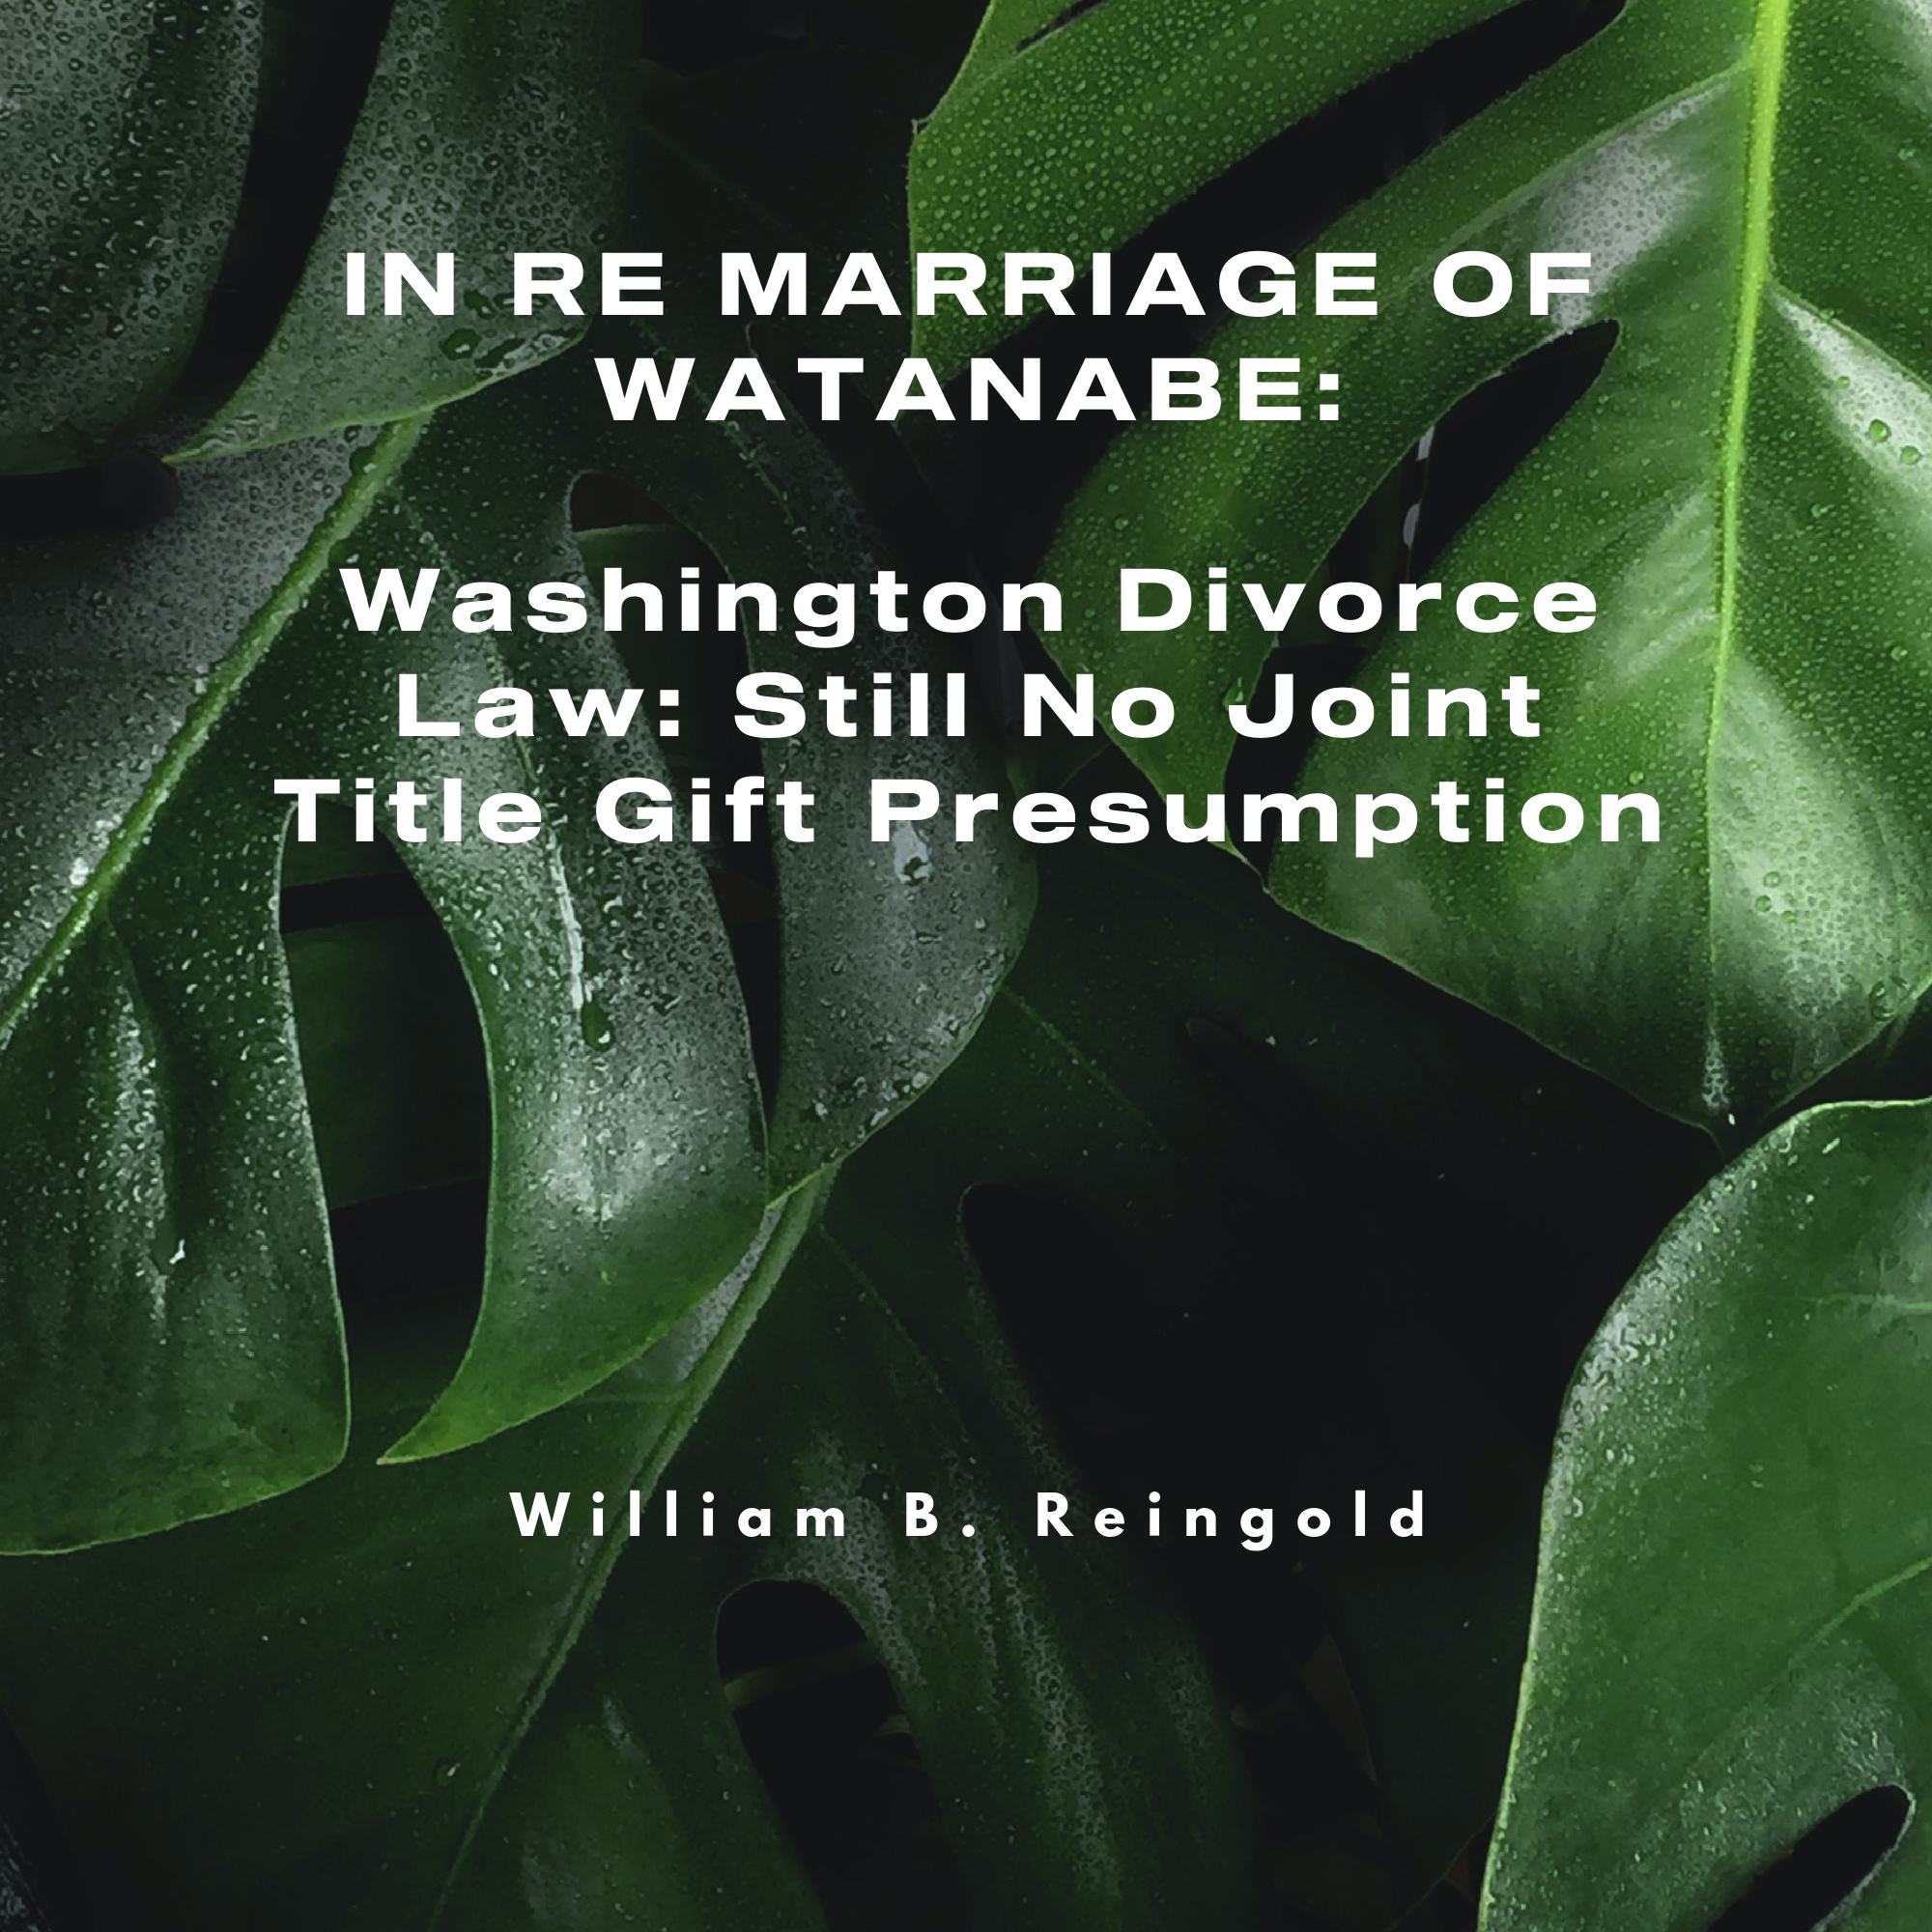 In re Marriage of Watanabe: Washington Divorce Law: Still No Joint Title Gift Presumption